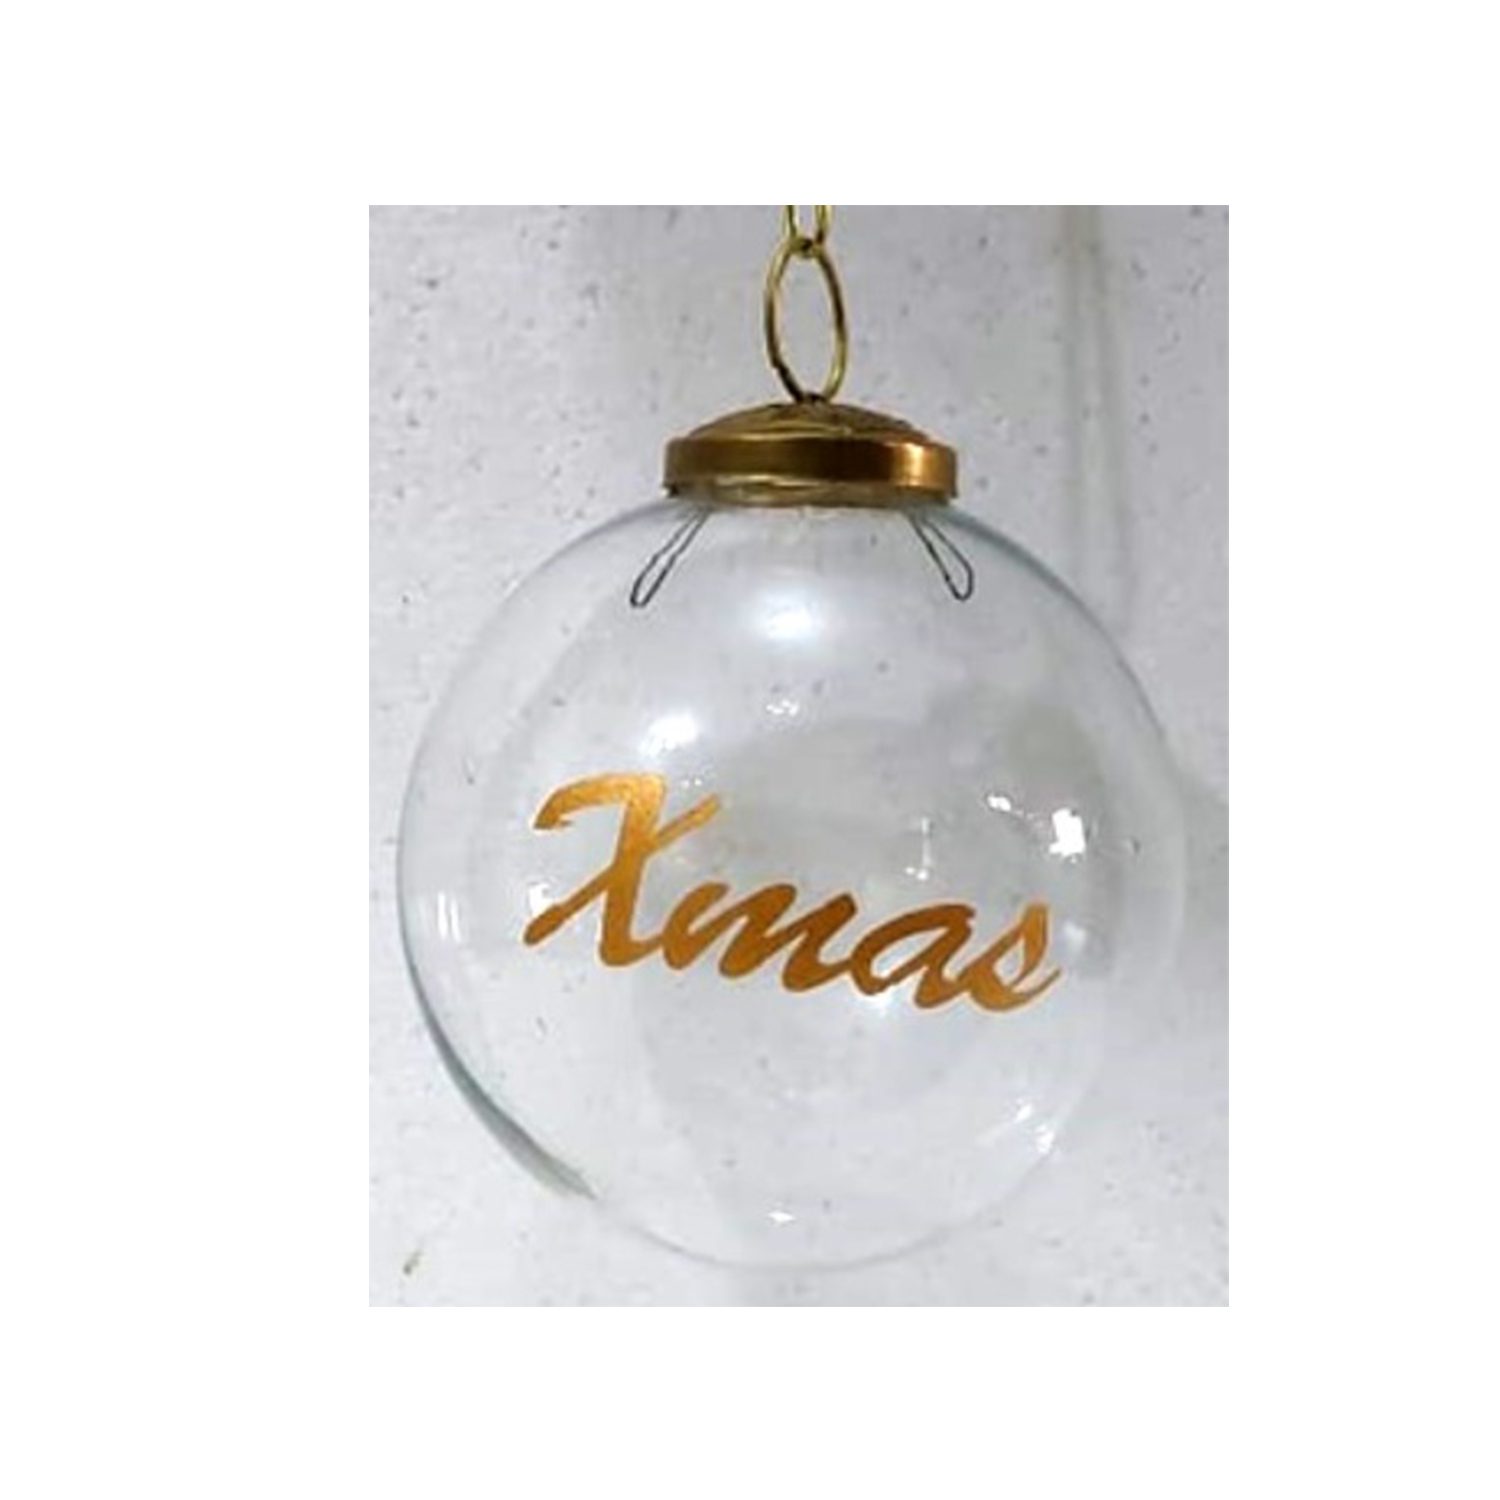 Fulton Glass Ornament, Transparent with Gold